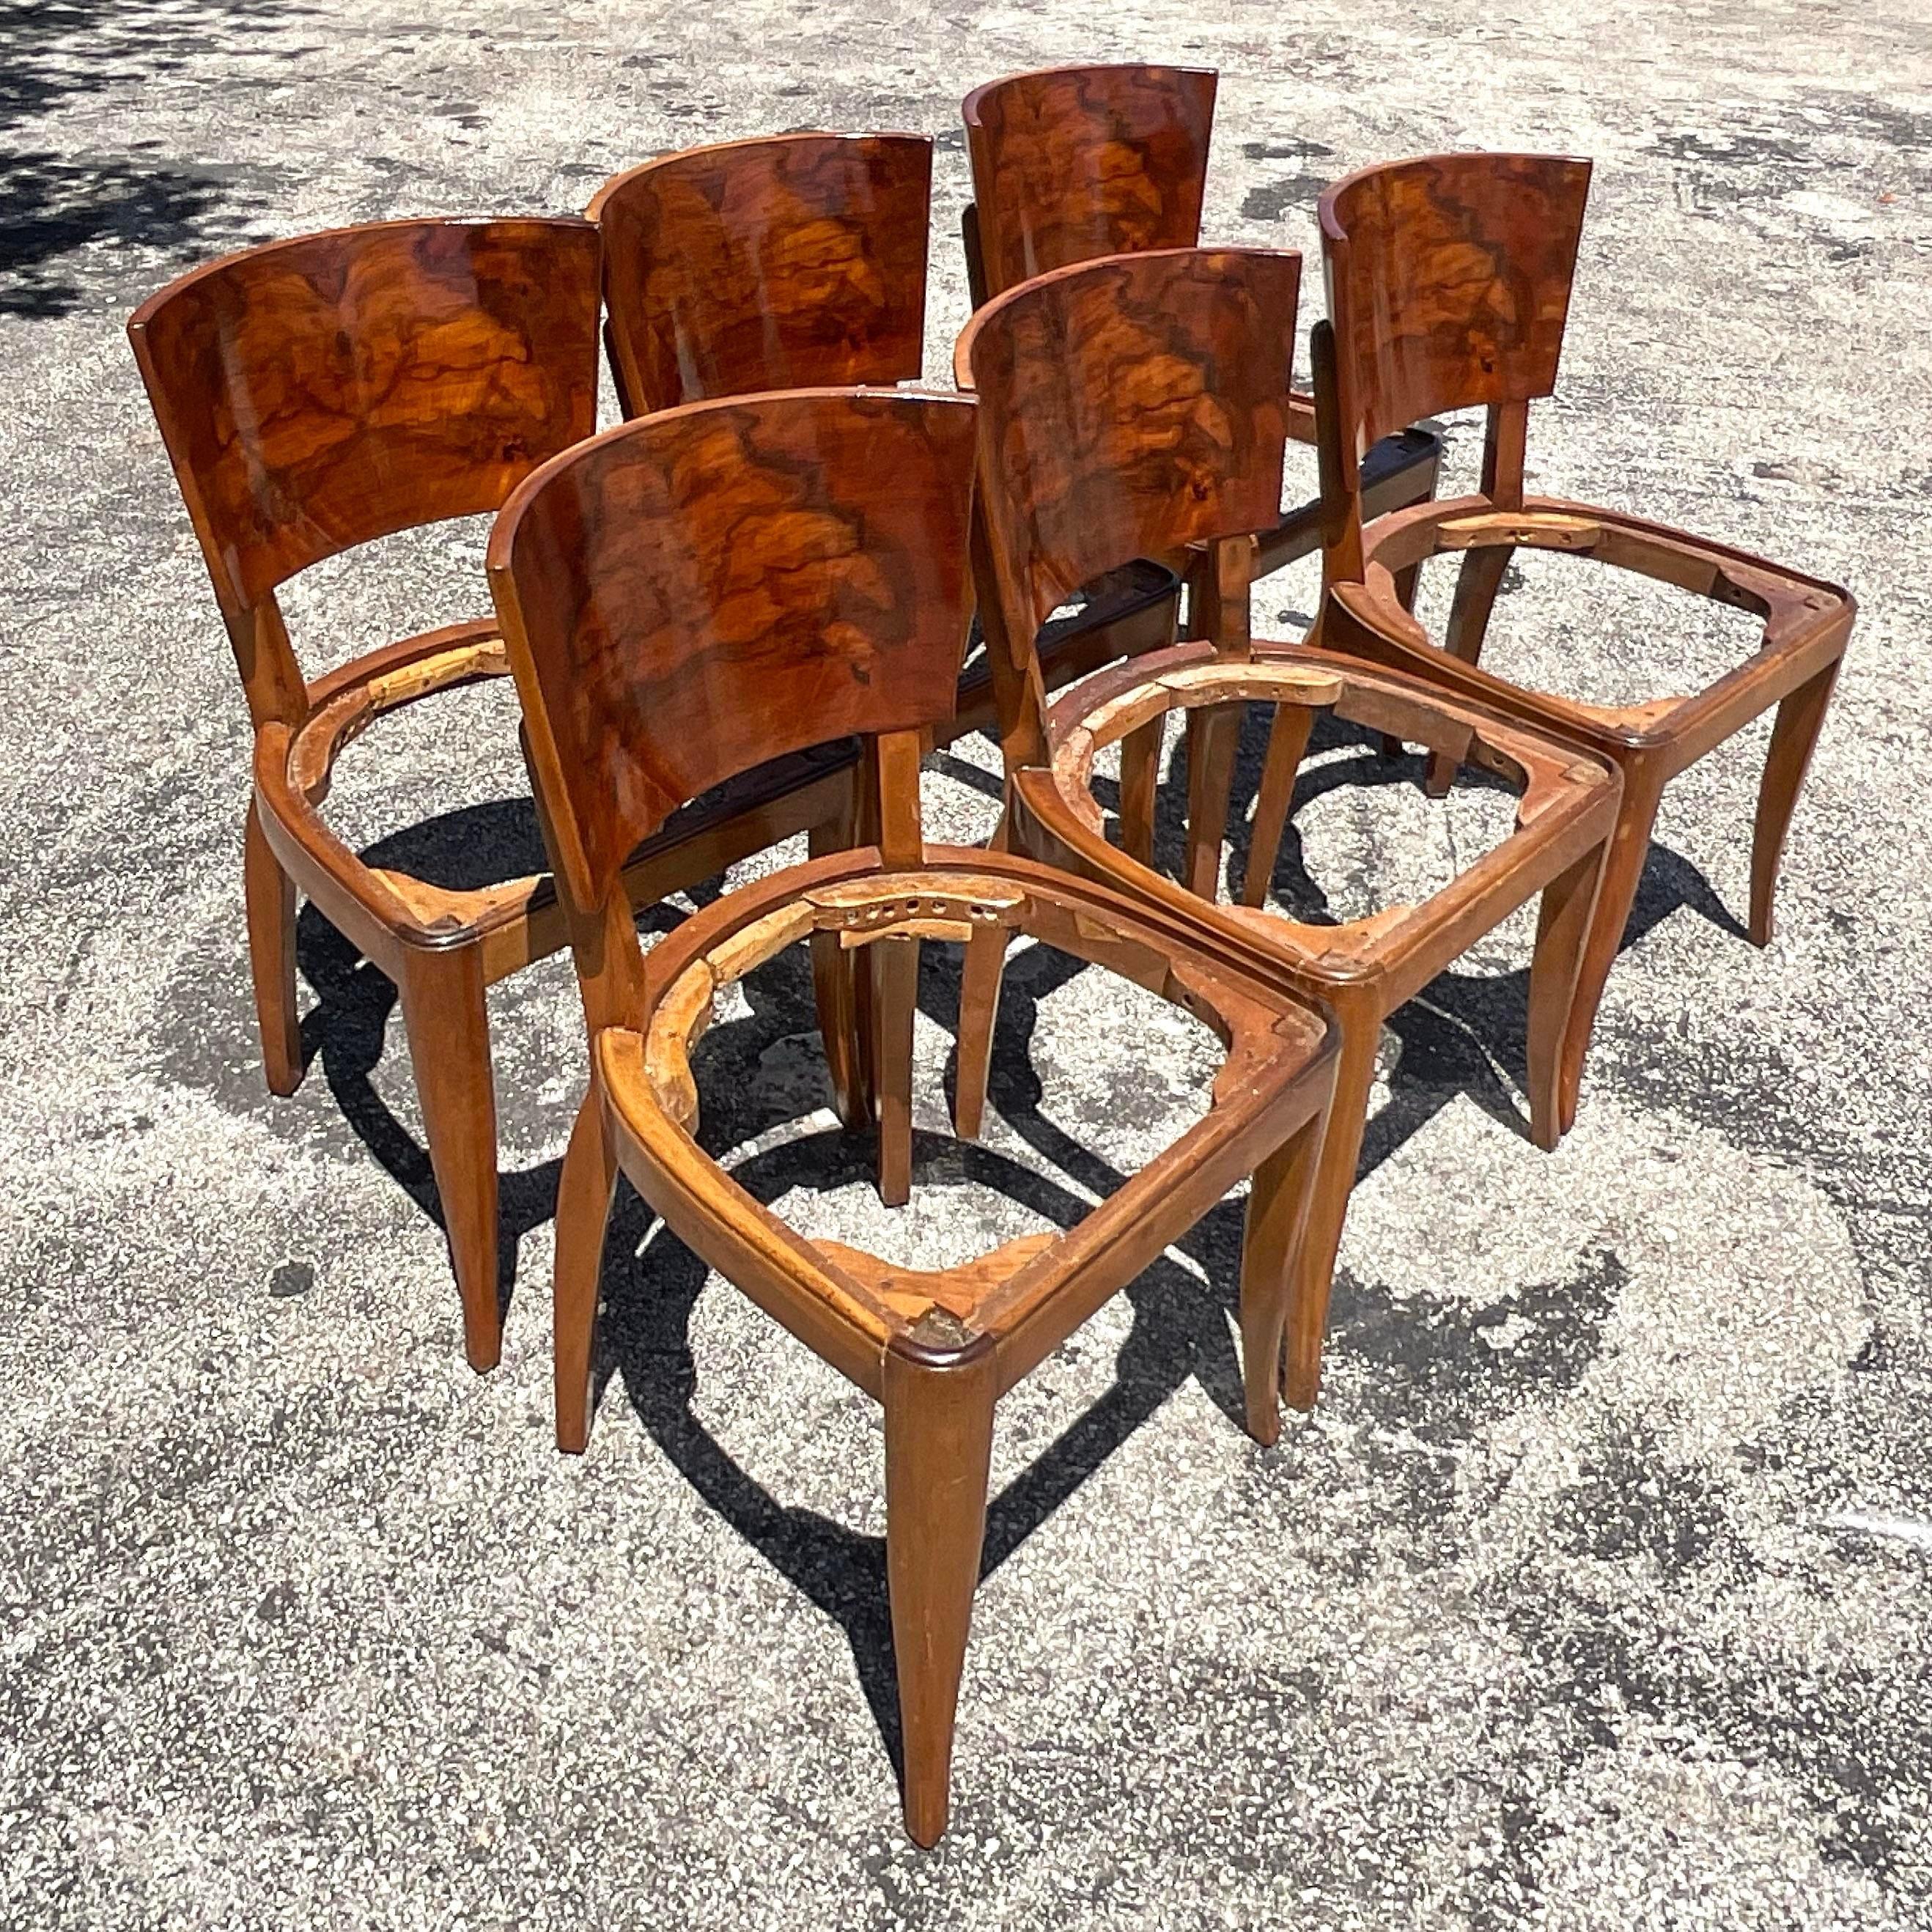 Art Deco Vintage Deco Burl Wood Dining Chairs - Set of 6 For Sale